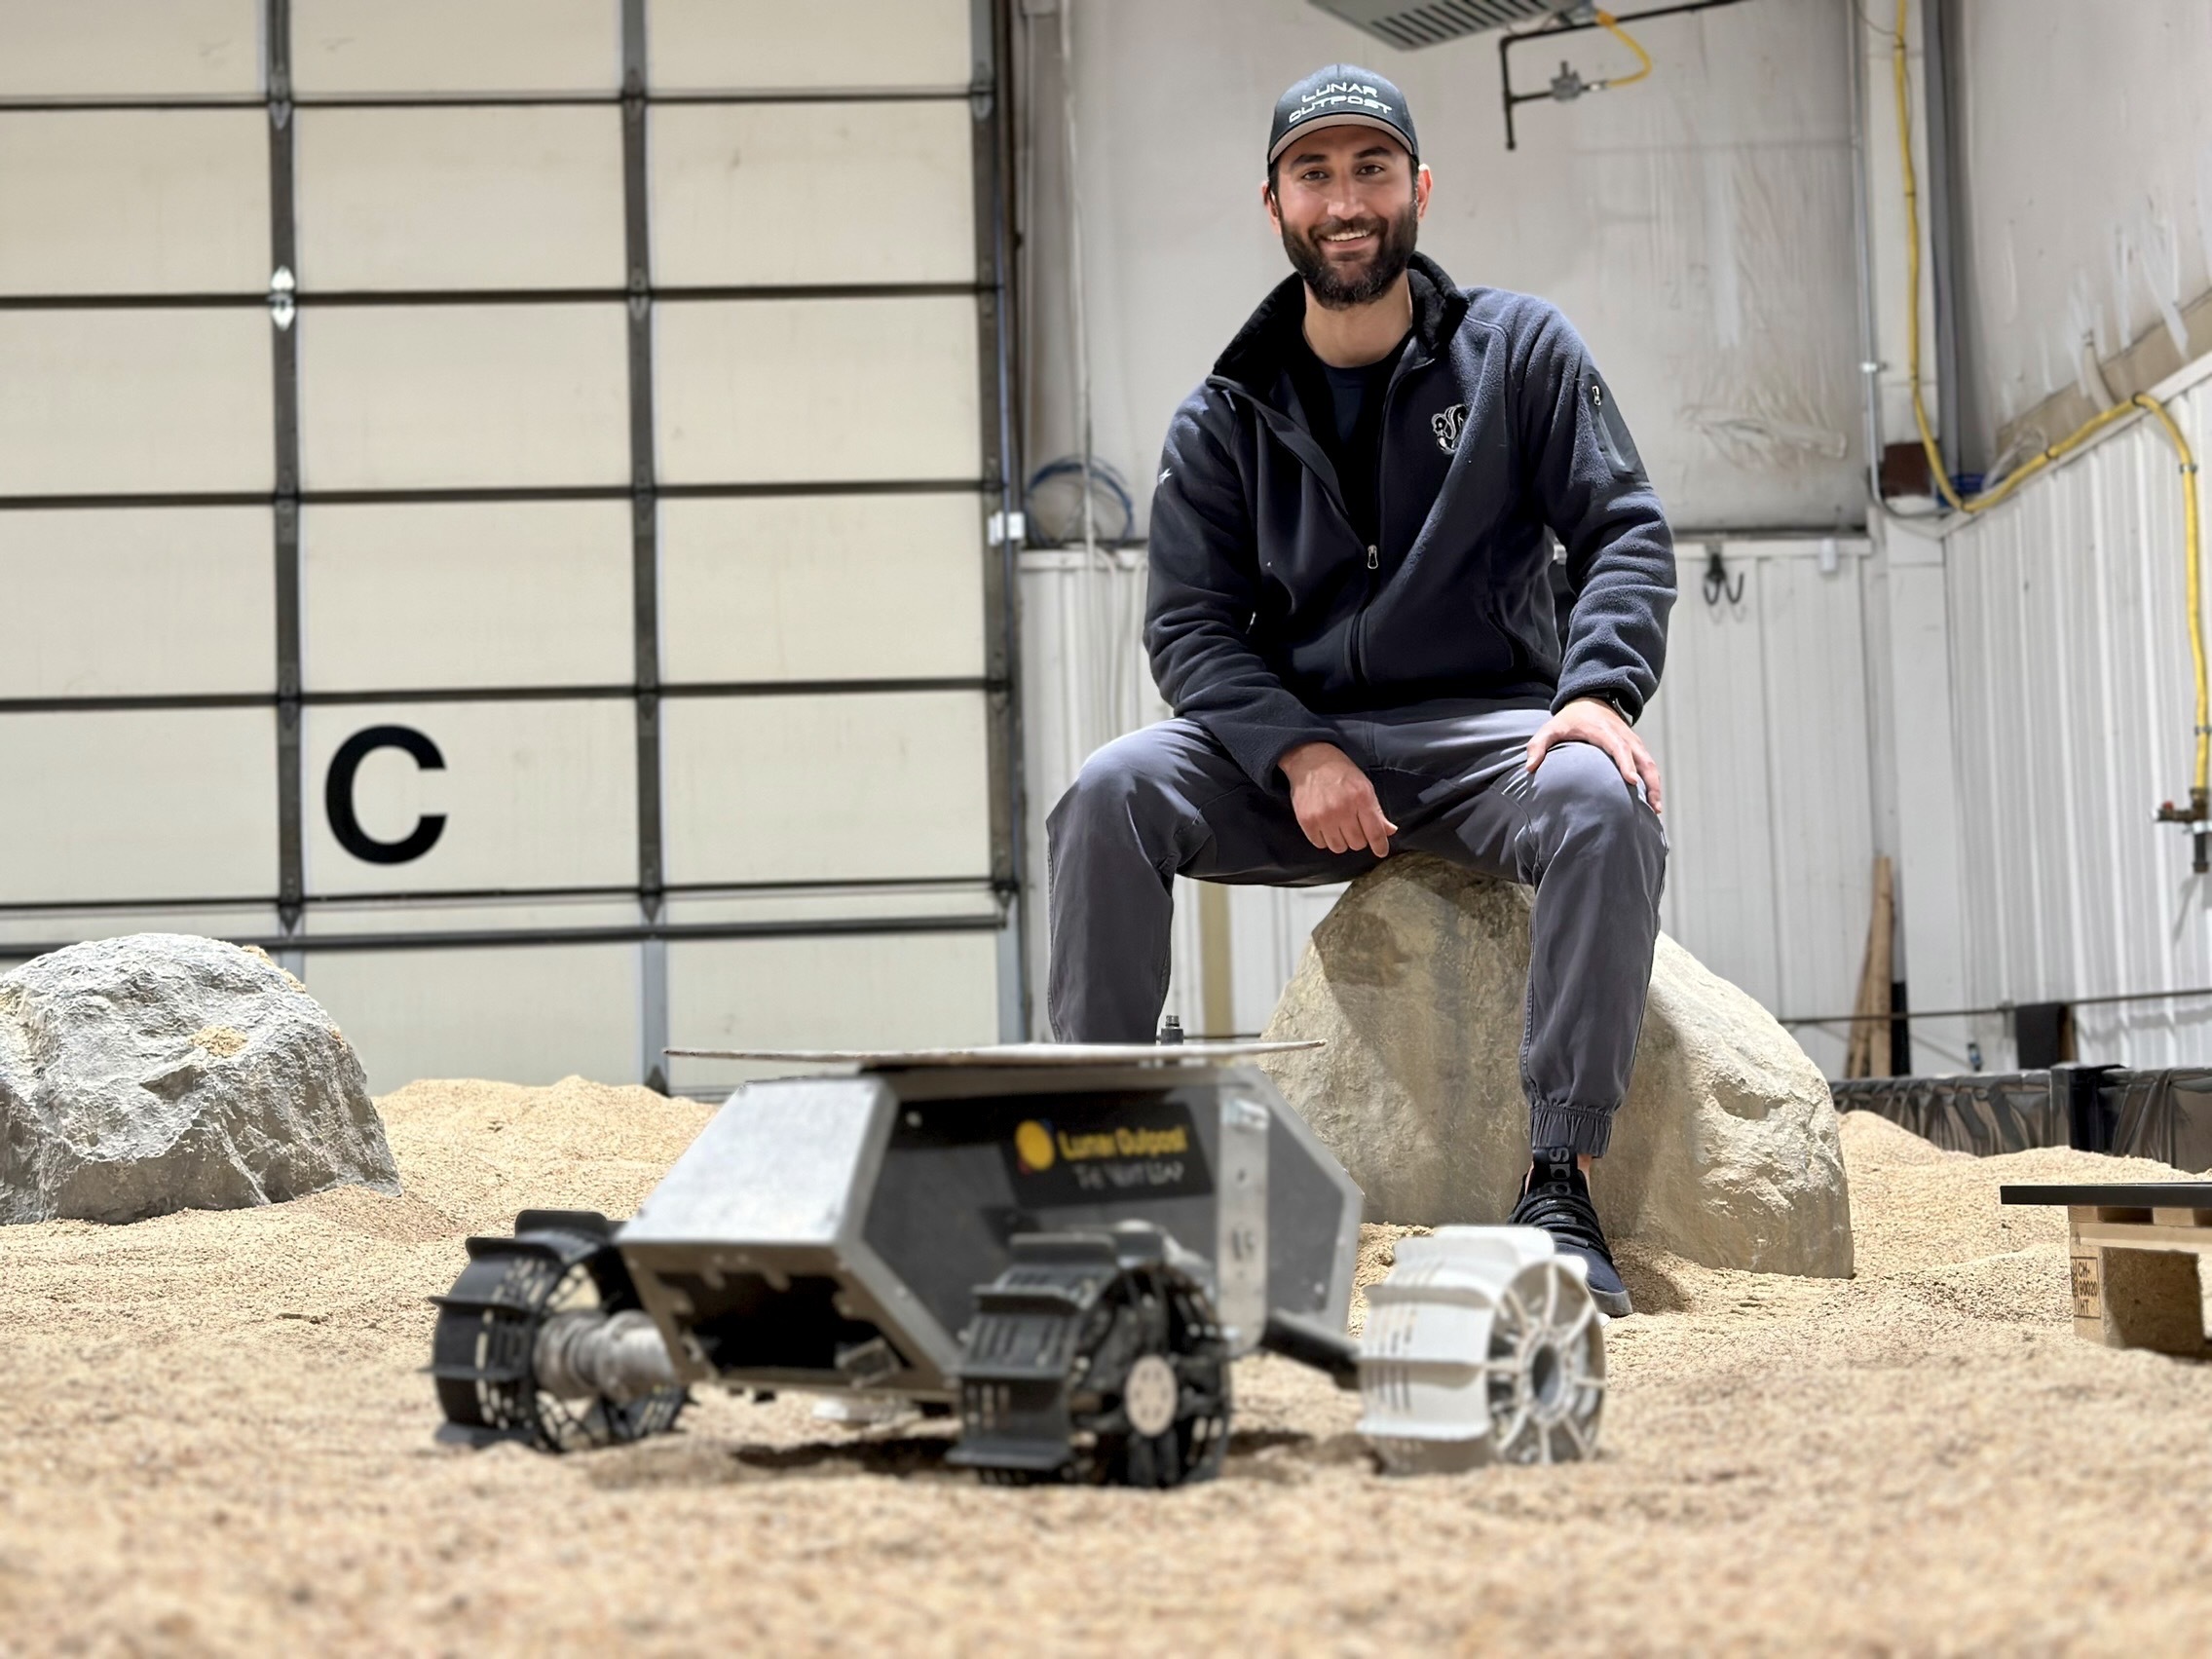 Justin Cyrus poses with a small test rover at Crater Beach in a warehouse in Arvada that simulates conditions on the moon.